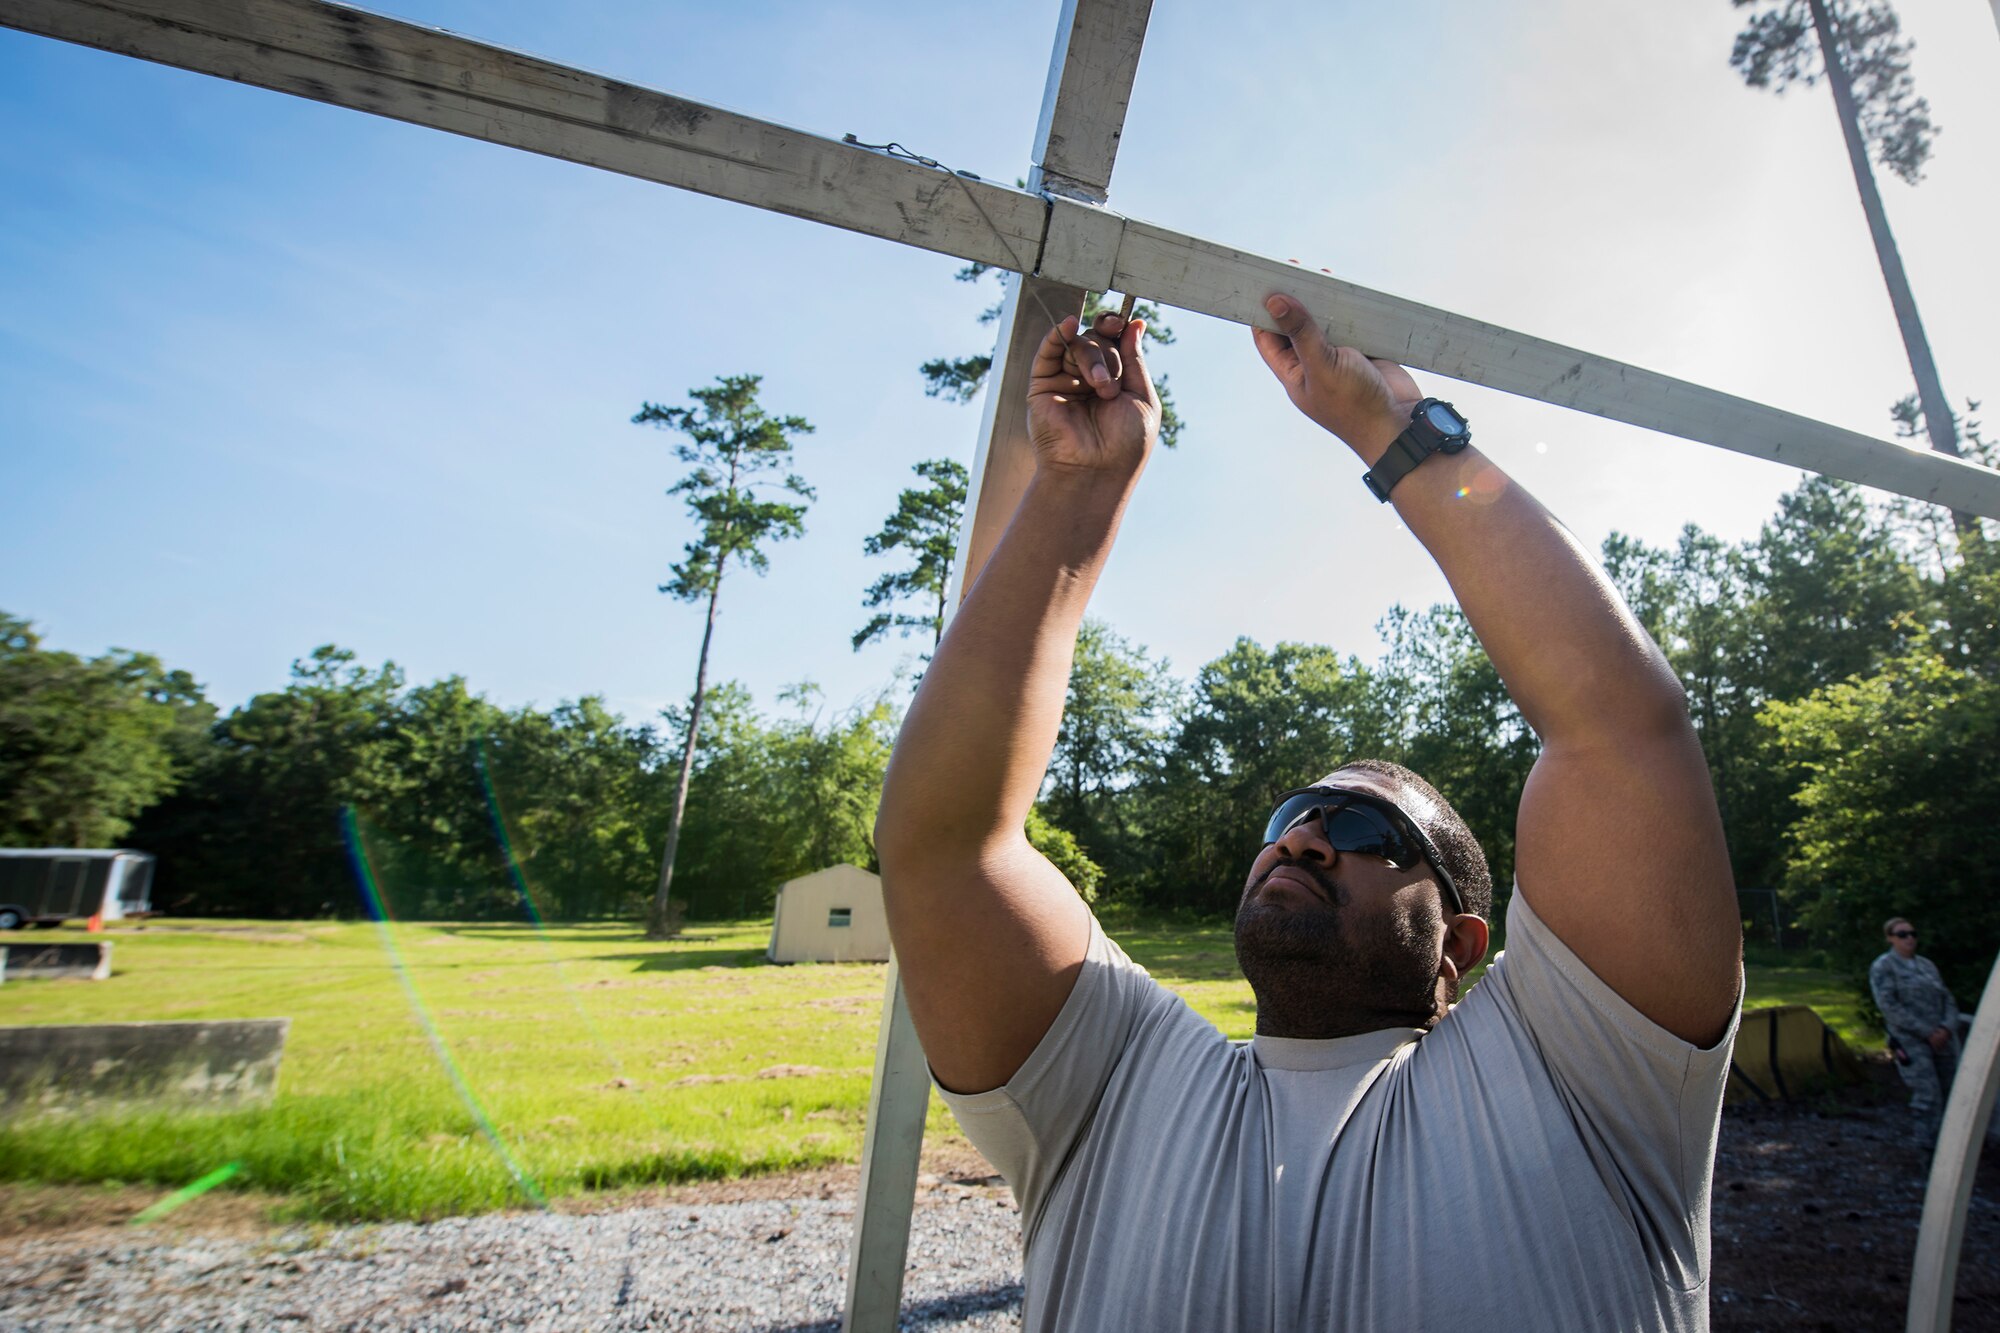 Capt. William Bush, 23d Civil Engineer Squadron project program manager, attaches a railing during a Chemical, Biological, Radiological, Nuclear and Explosive (CBRNE) Olympics, June 21, 2018, at Moody Air Force Base, Ga.  Moody held its first CBRNE Olympics to further Airmen’s overall knowledge on all of the aspects of CBRNE through a new method that was meant to establish a sense of competition and camaraderie. (U.S. Air Force photo by Airman 1st Class Eugene Oliver)